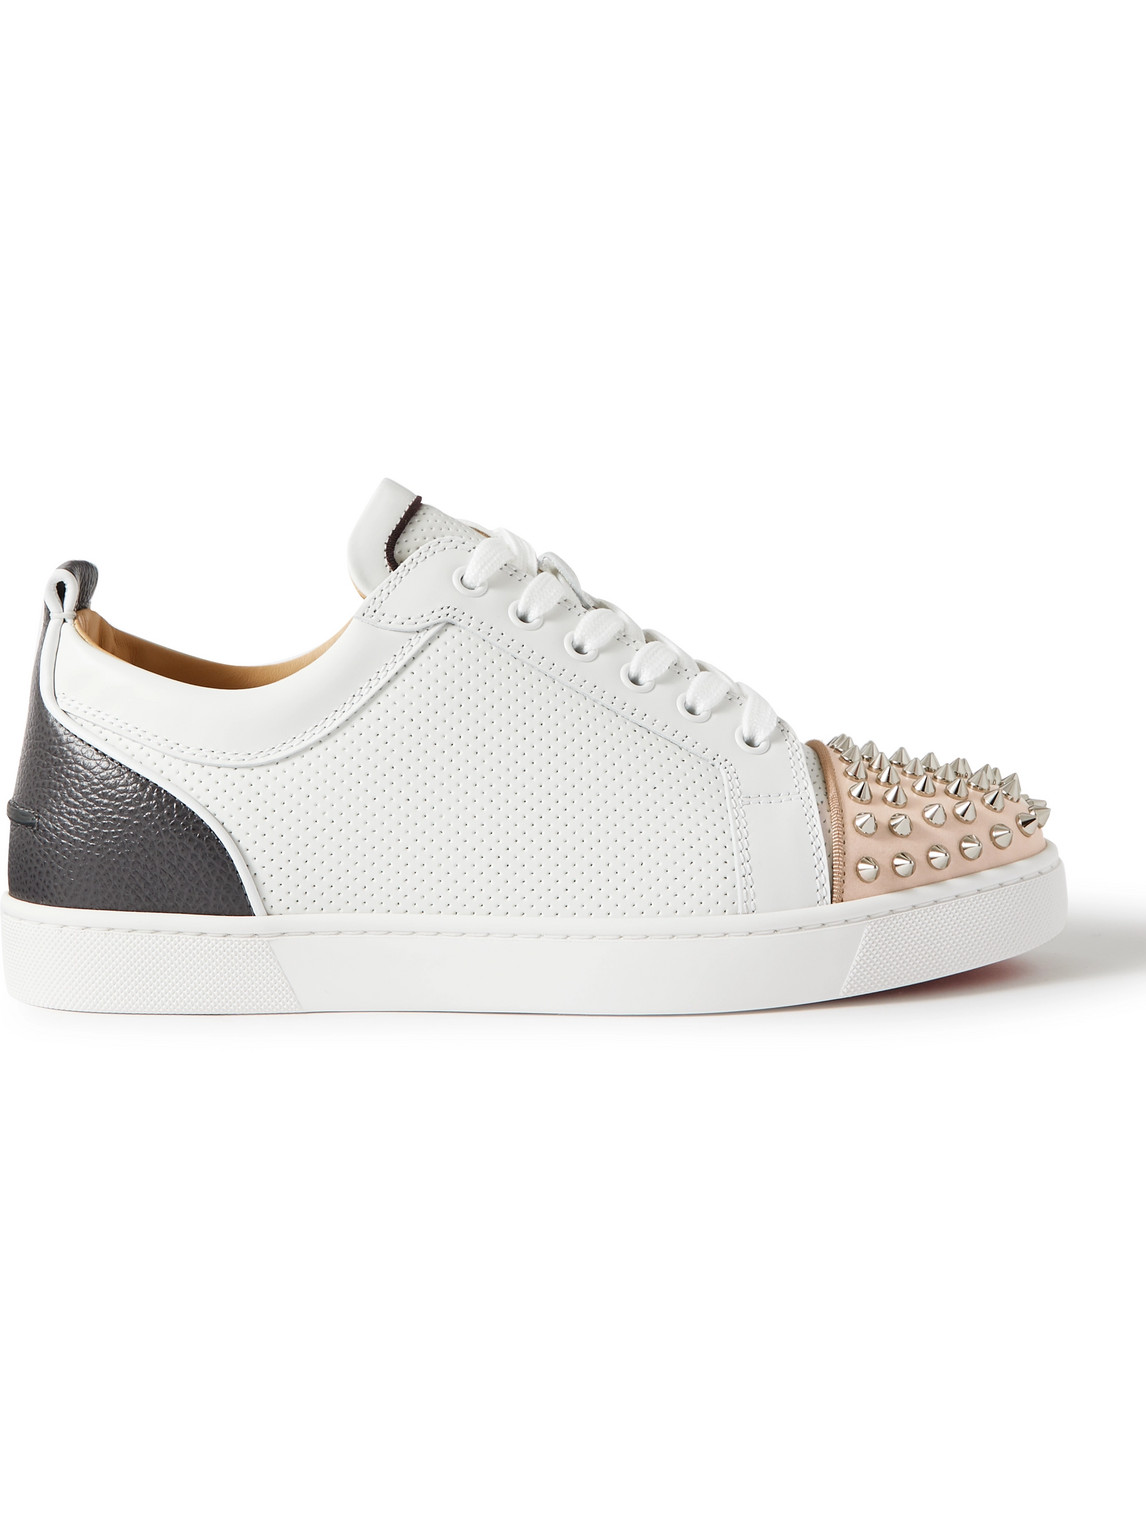 Christian Louboutin Louis Junior Spikes Cap-toe Leather Trainers In White